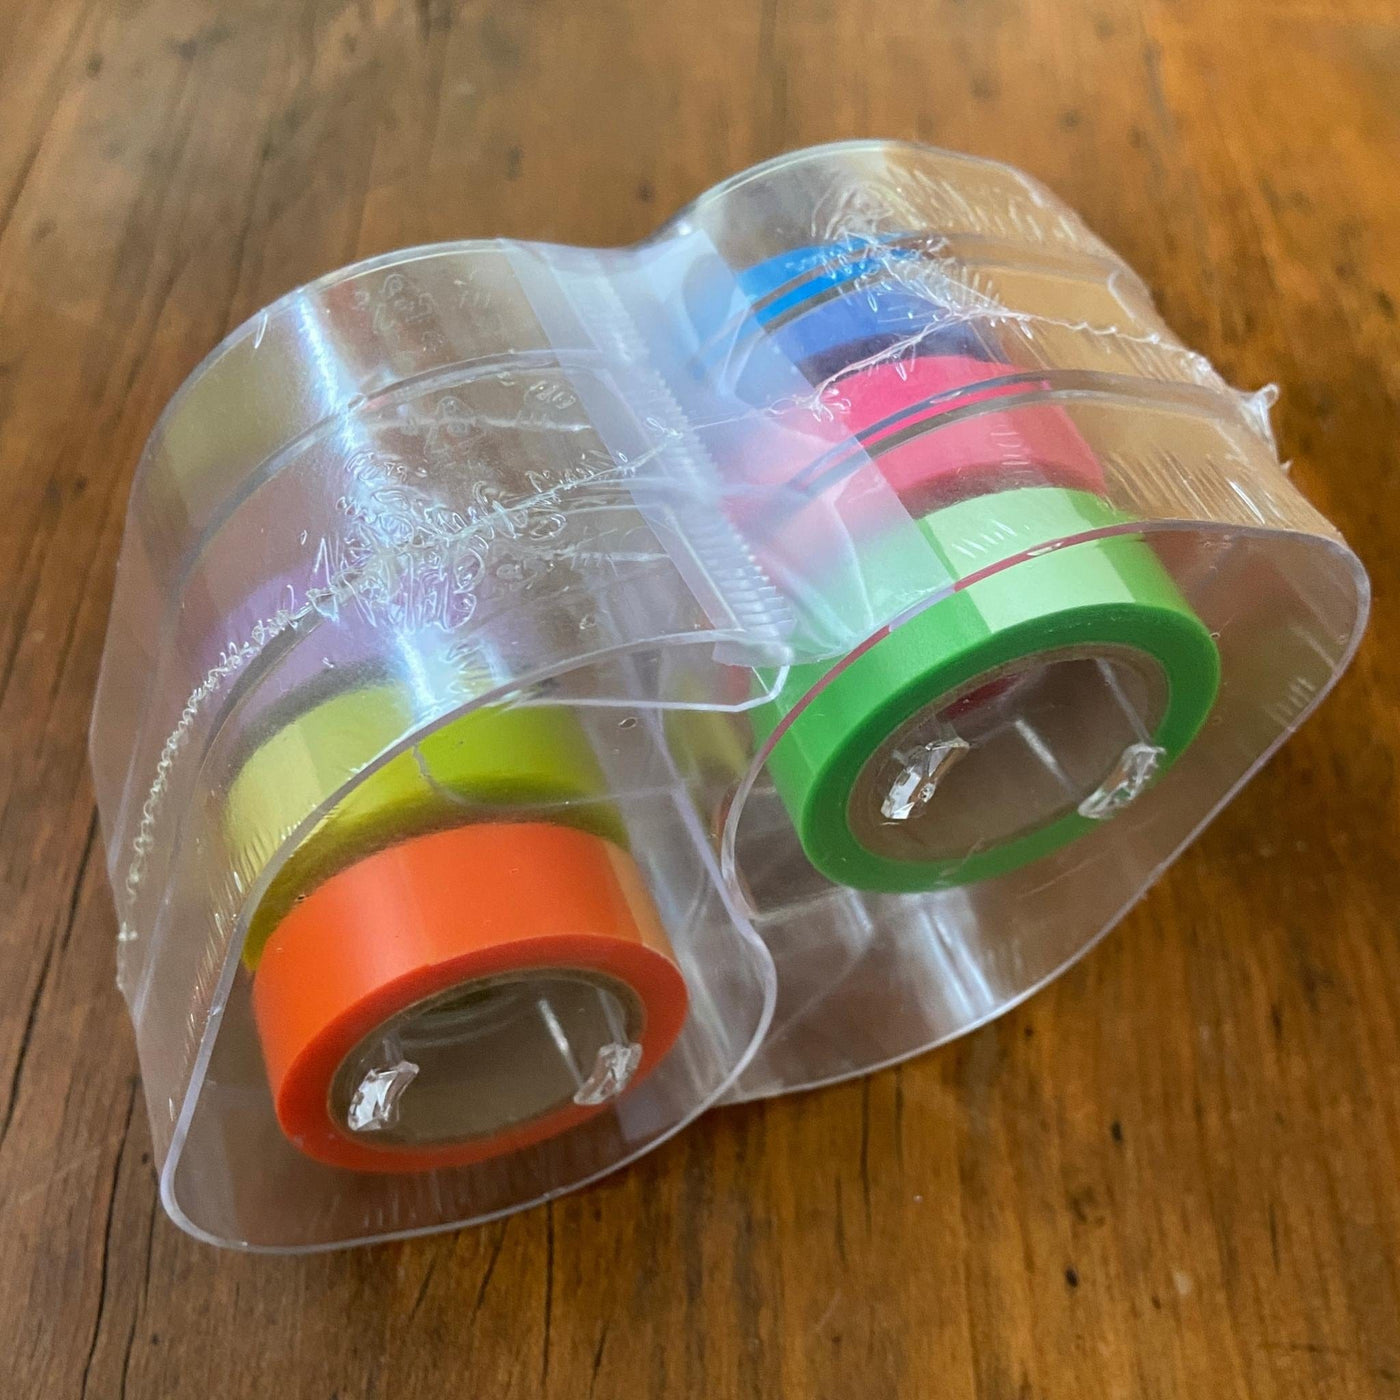 Package of highlighter tape in orange, green, yellow, pink, blue, and purple